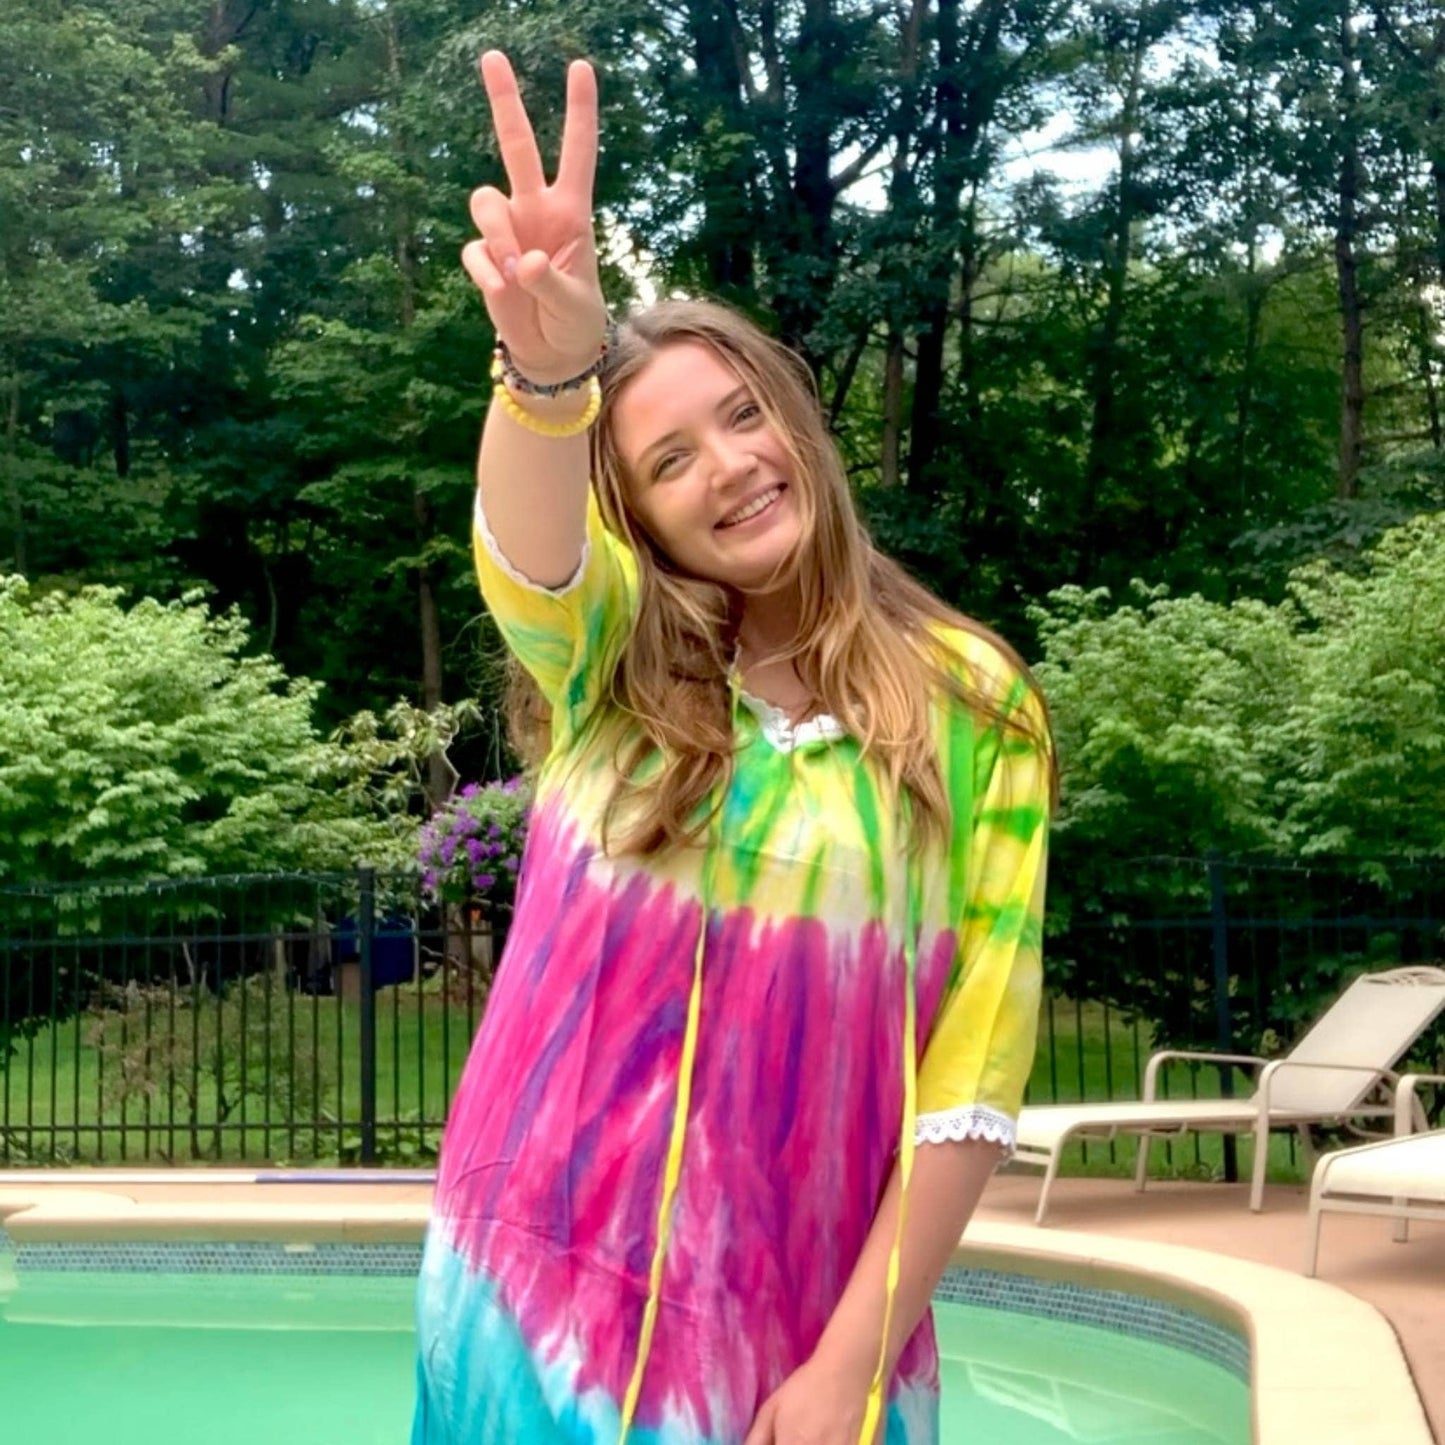 Model giving a peace sign wearing a brilliant tie dye cover up by the pool.